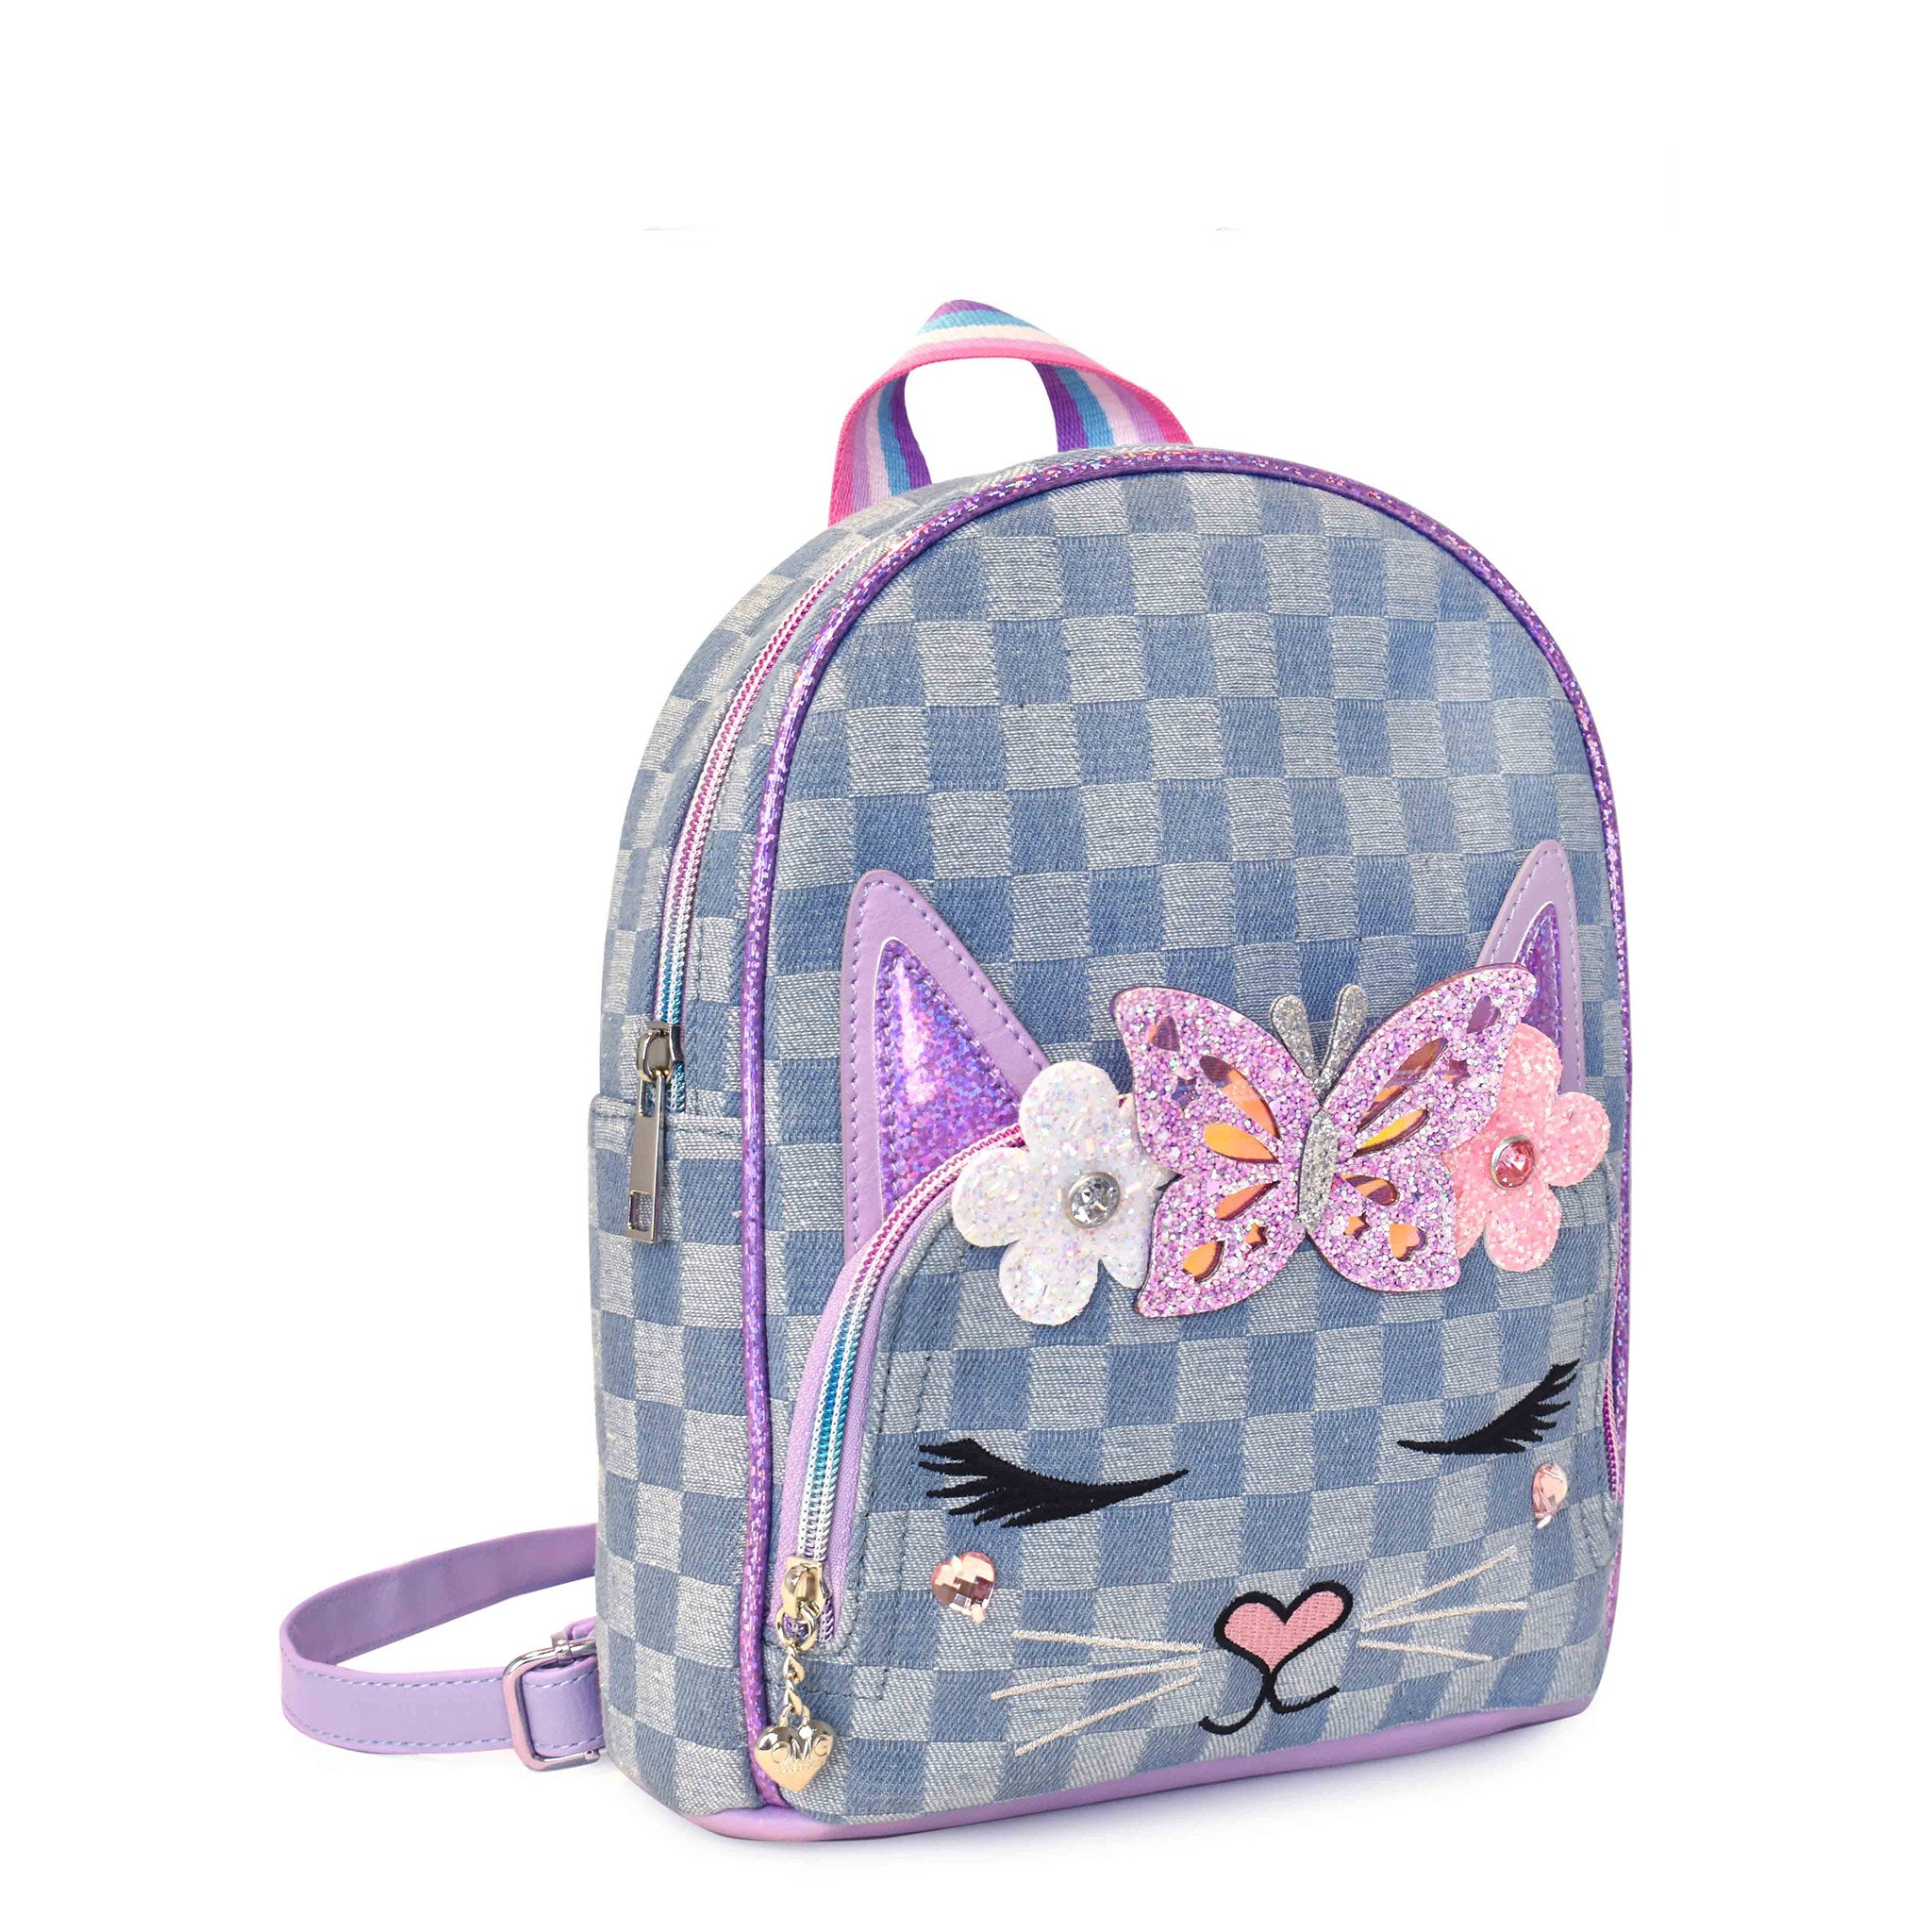 Side  view of a kitty cat face denim checkerboard printed mini backpack with glitter butterfly and flower appliqués